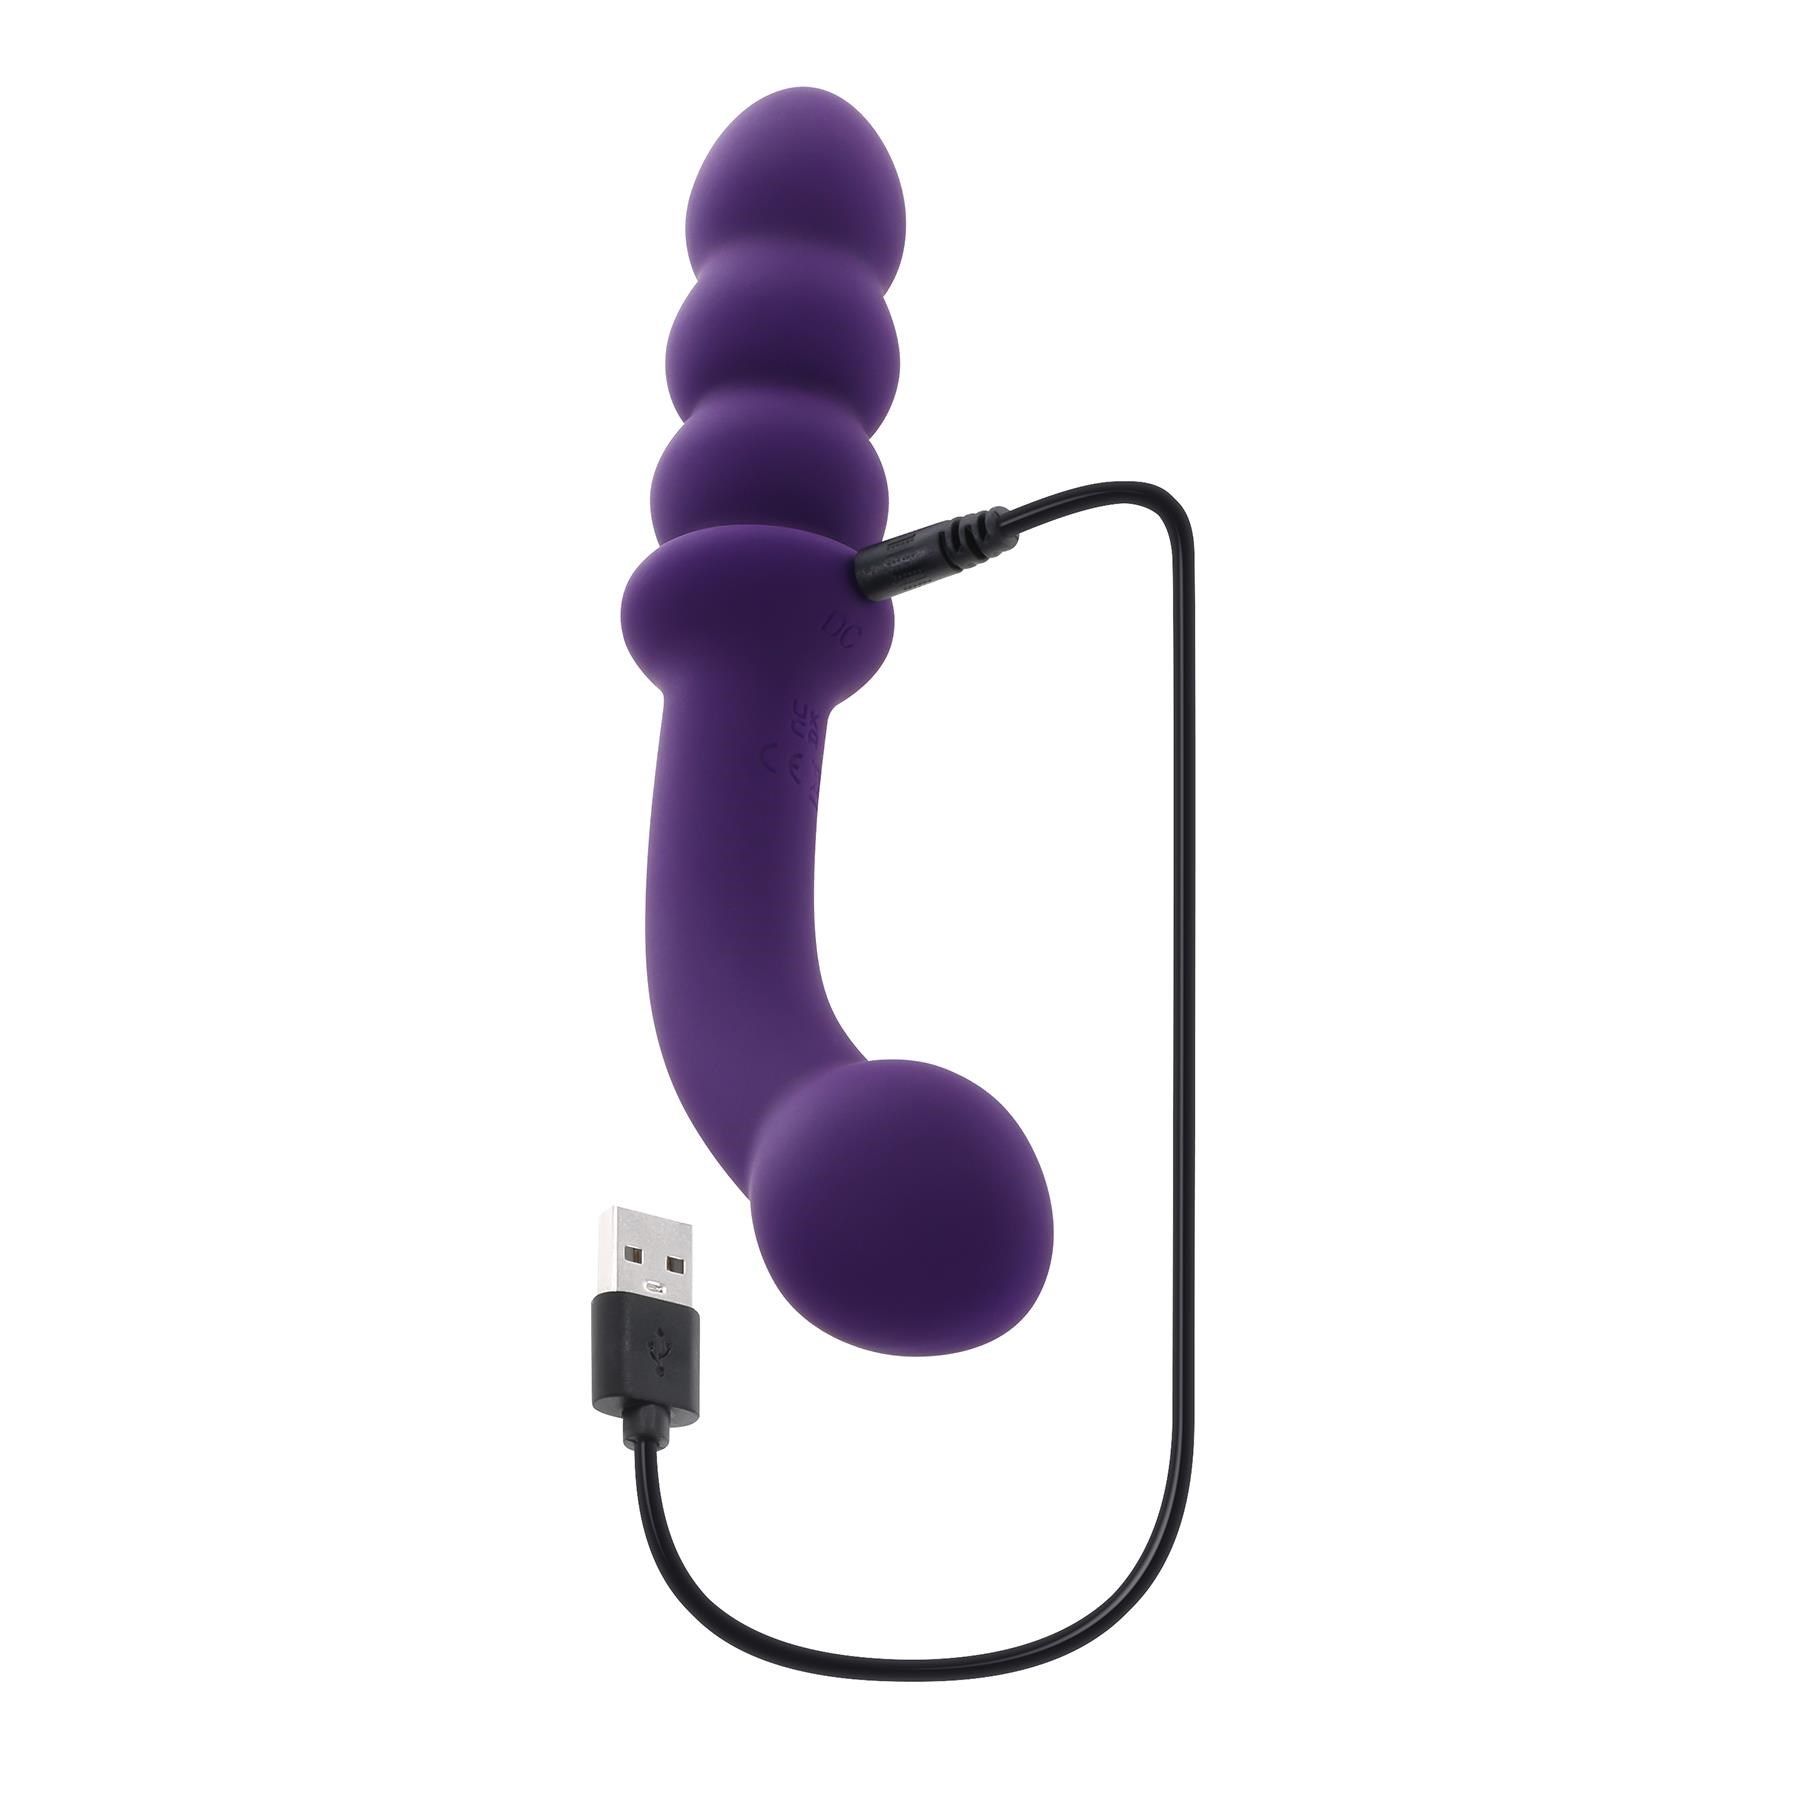 Playboy Pleasure The Seeker Dual Ended Vibrator - Product Shot With Charging Cable